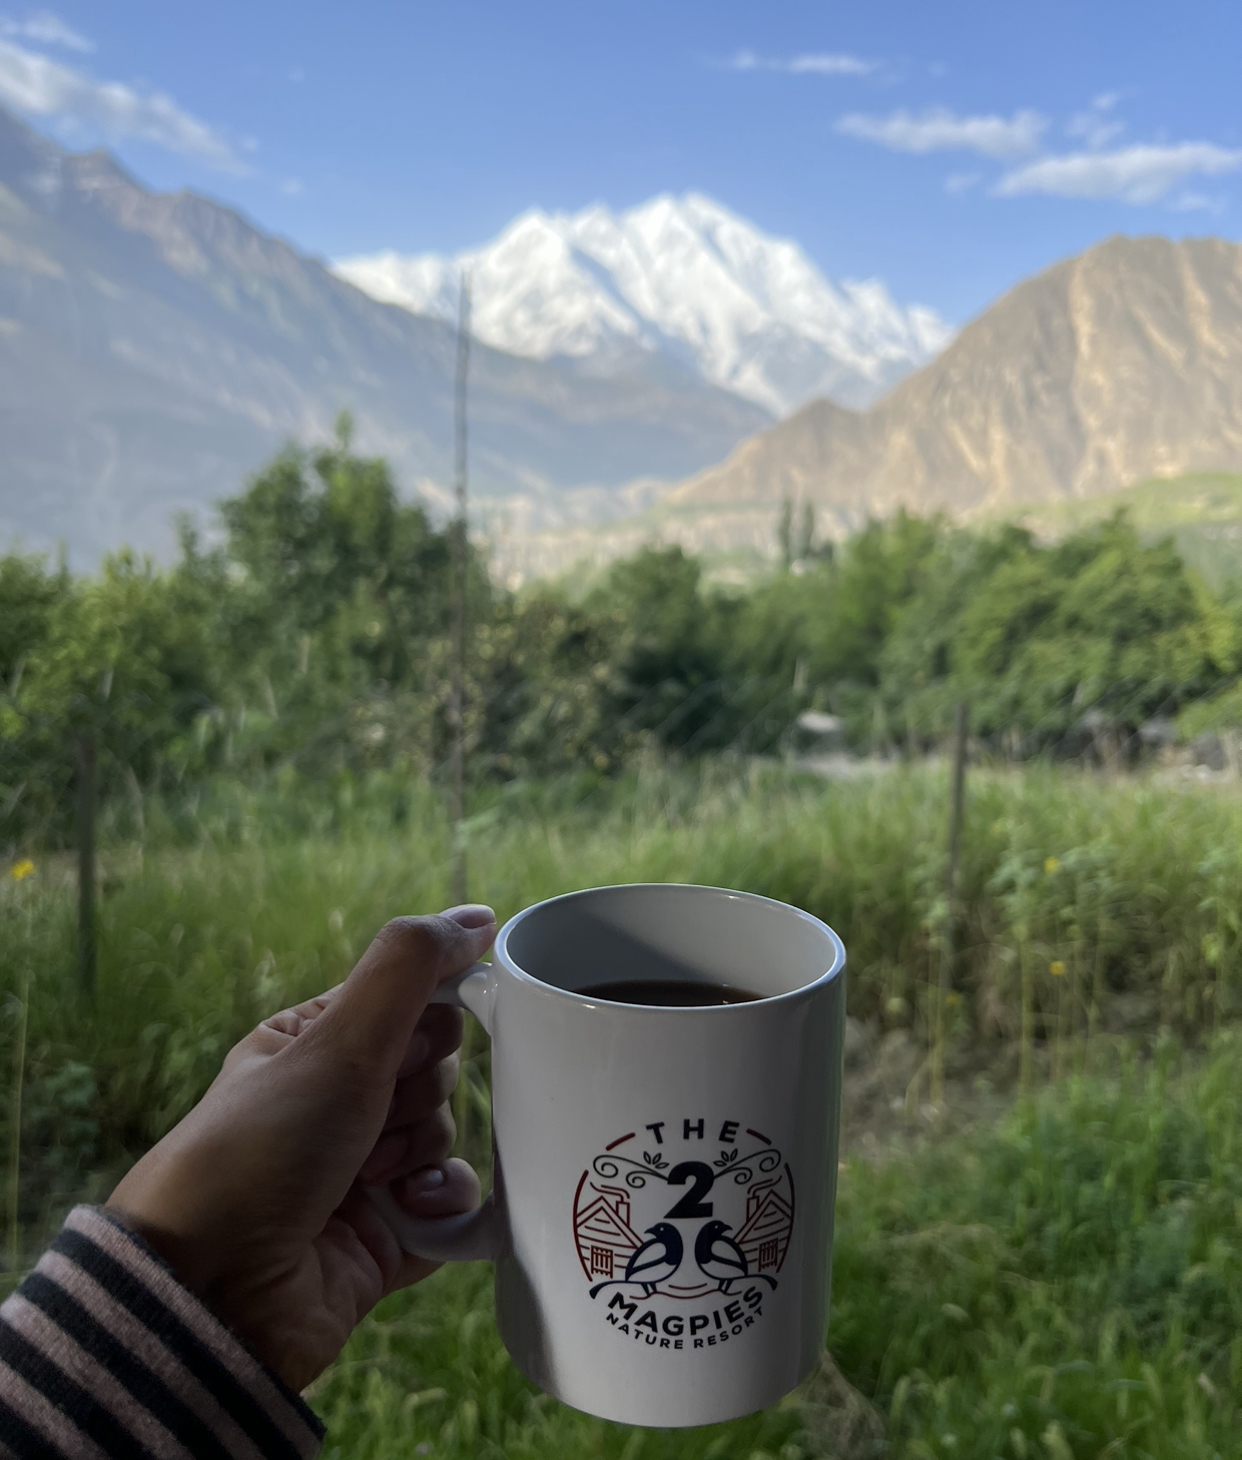 Holding a mug of tea in front of a scenic view of snow-capped mountains in Hunza